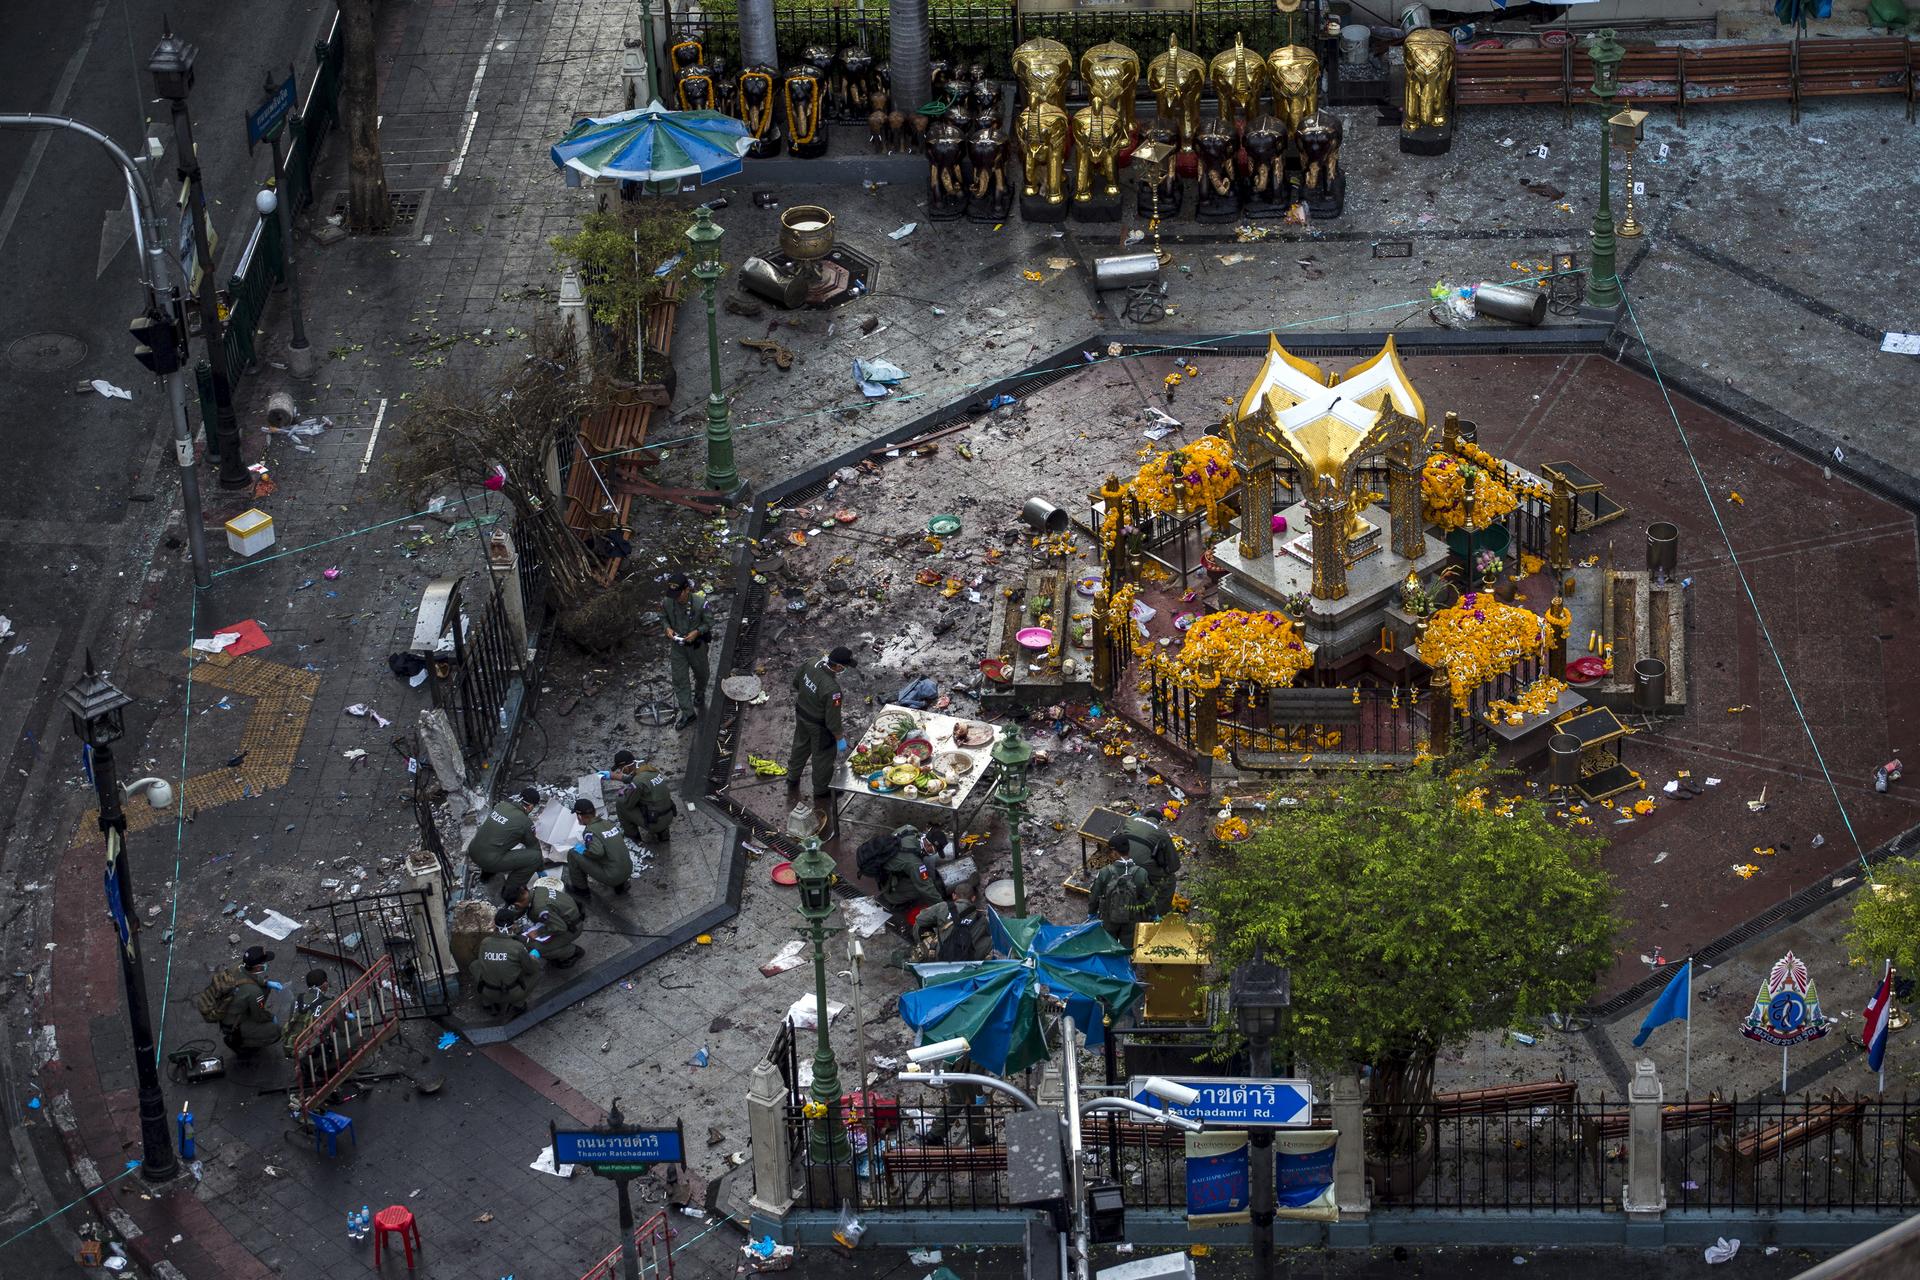 Experts investigate the Erawan shrine at the site of a deadly blast in central Bangkok, Thailand.